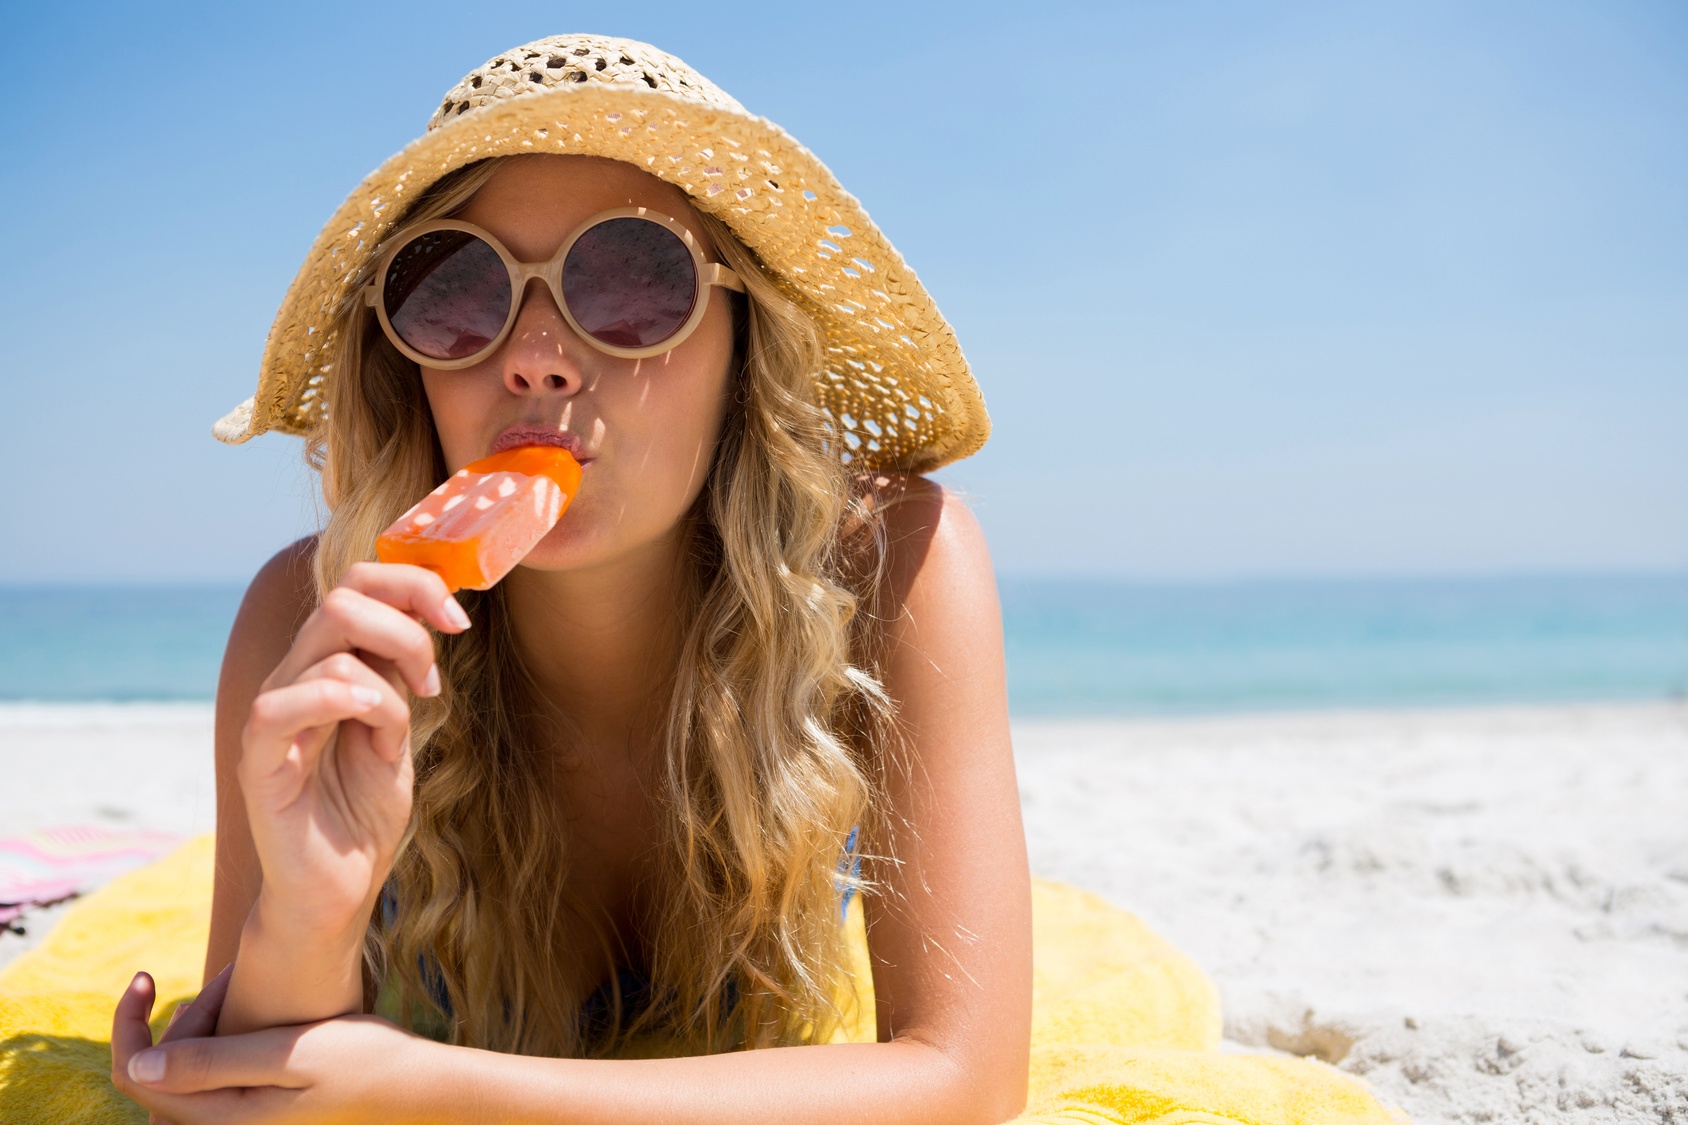 Woman eating popsicle while relaxing at beach